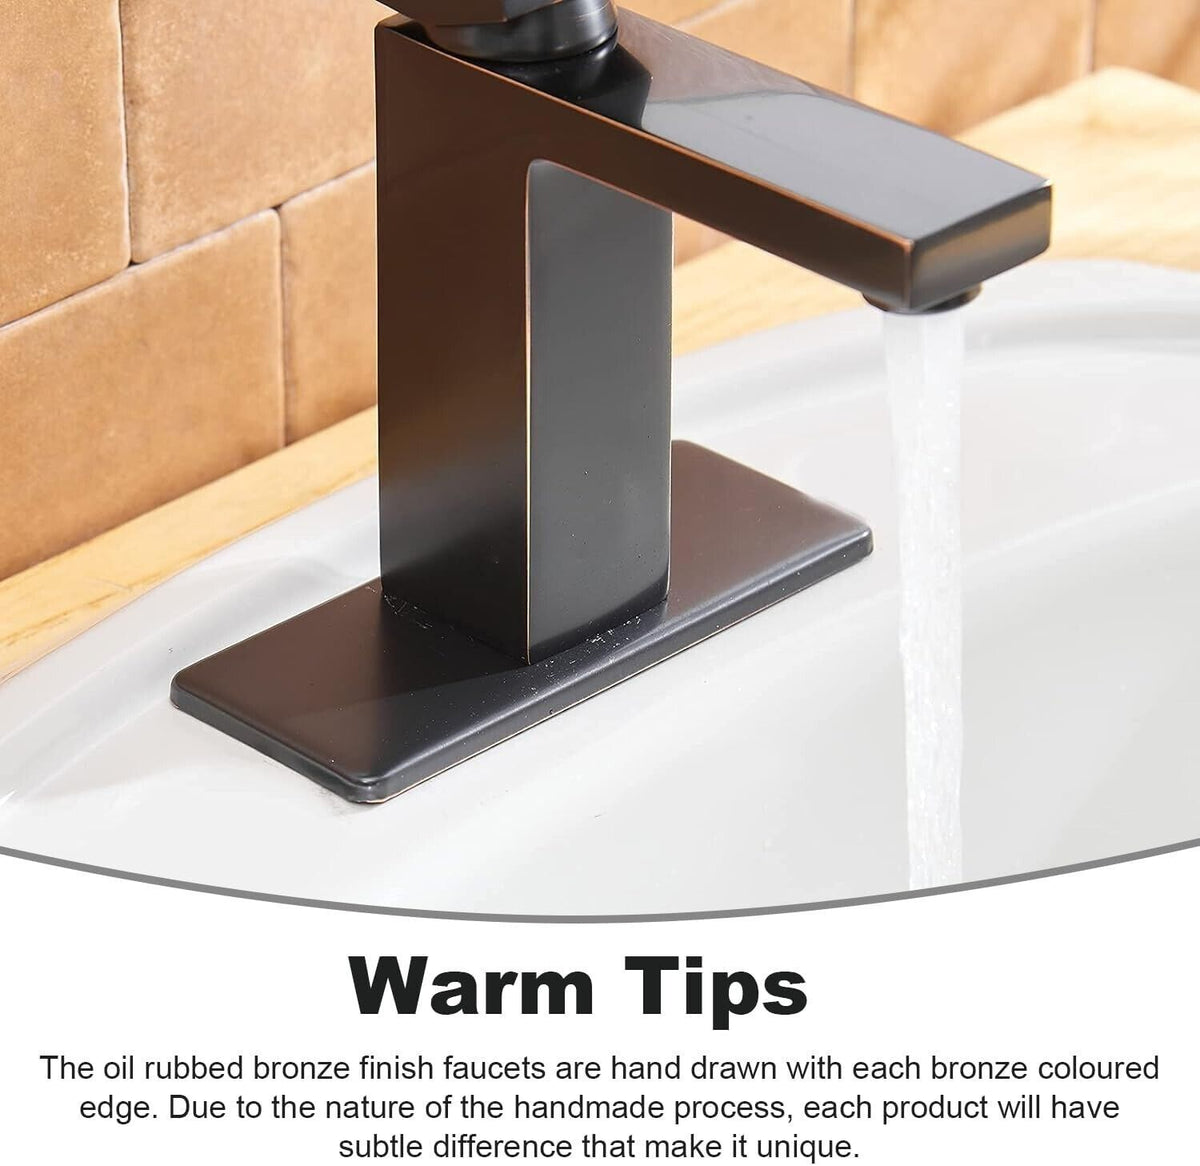 BWE Bathroom Sink Faucet Oil Rubbed Bronze Single Hole Modern Single Handle Bathroom Faucet with Pop Up Drain Assembly with Overflow and Supply Line Vanity Bath Mixer Tap Faucet Lead-Fre